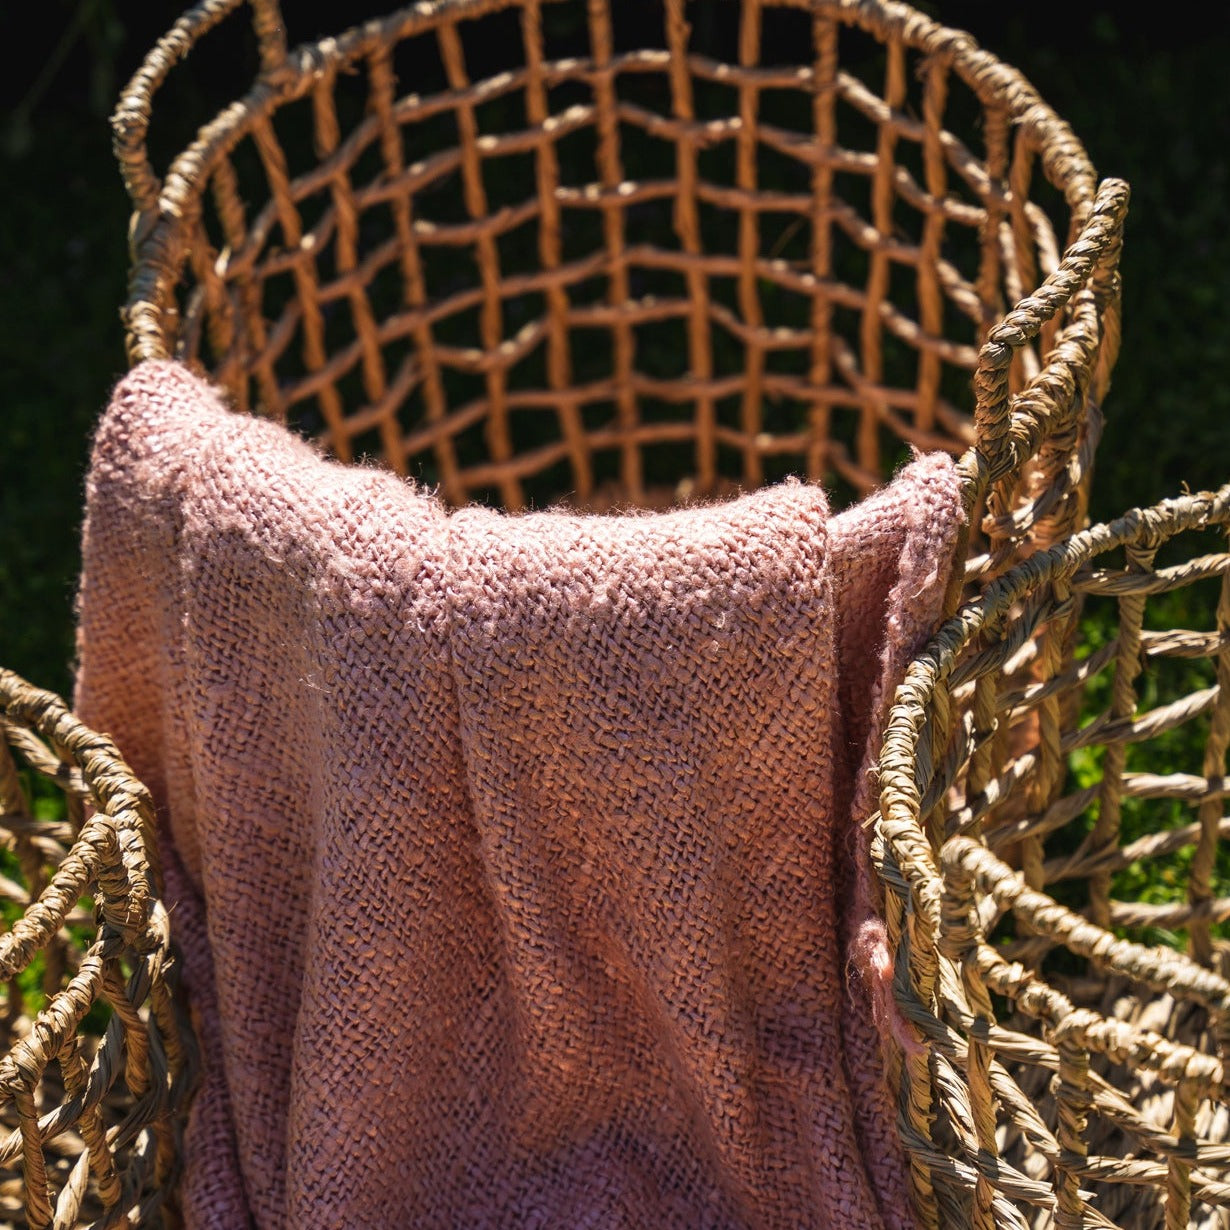 THE S'IL VOUS Plaid Salmon Pink outdoor view on basket